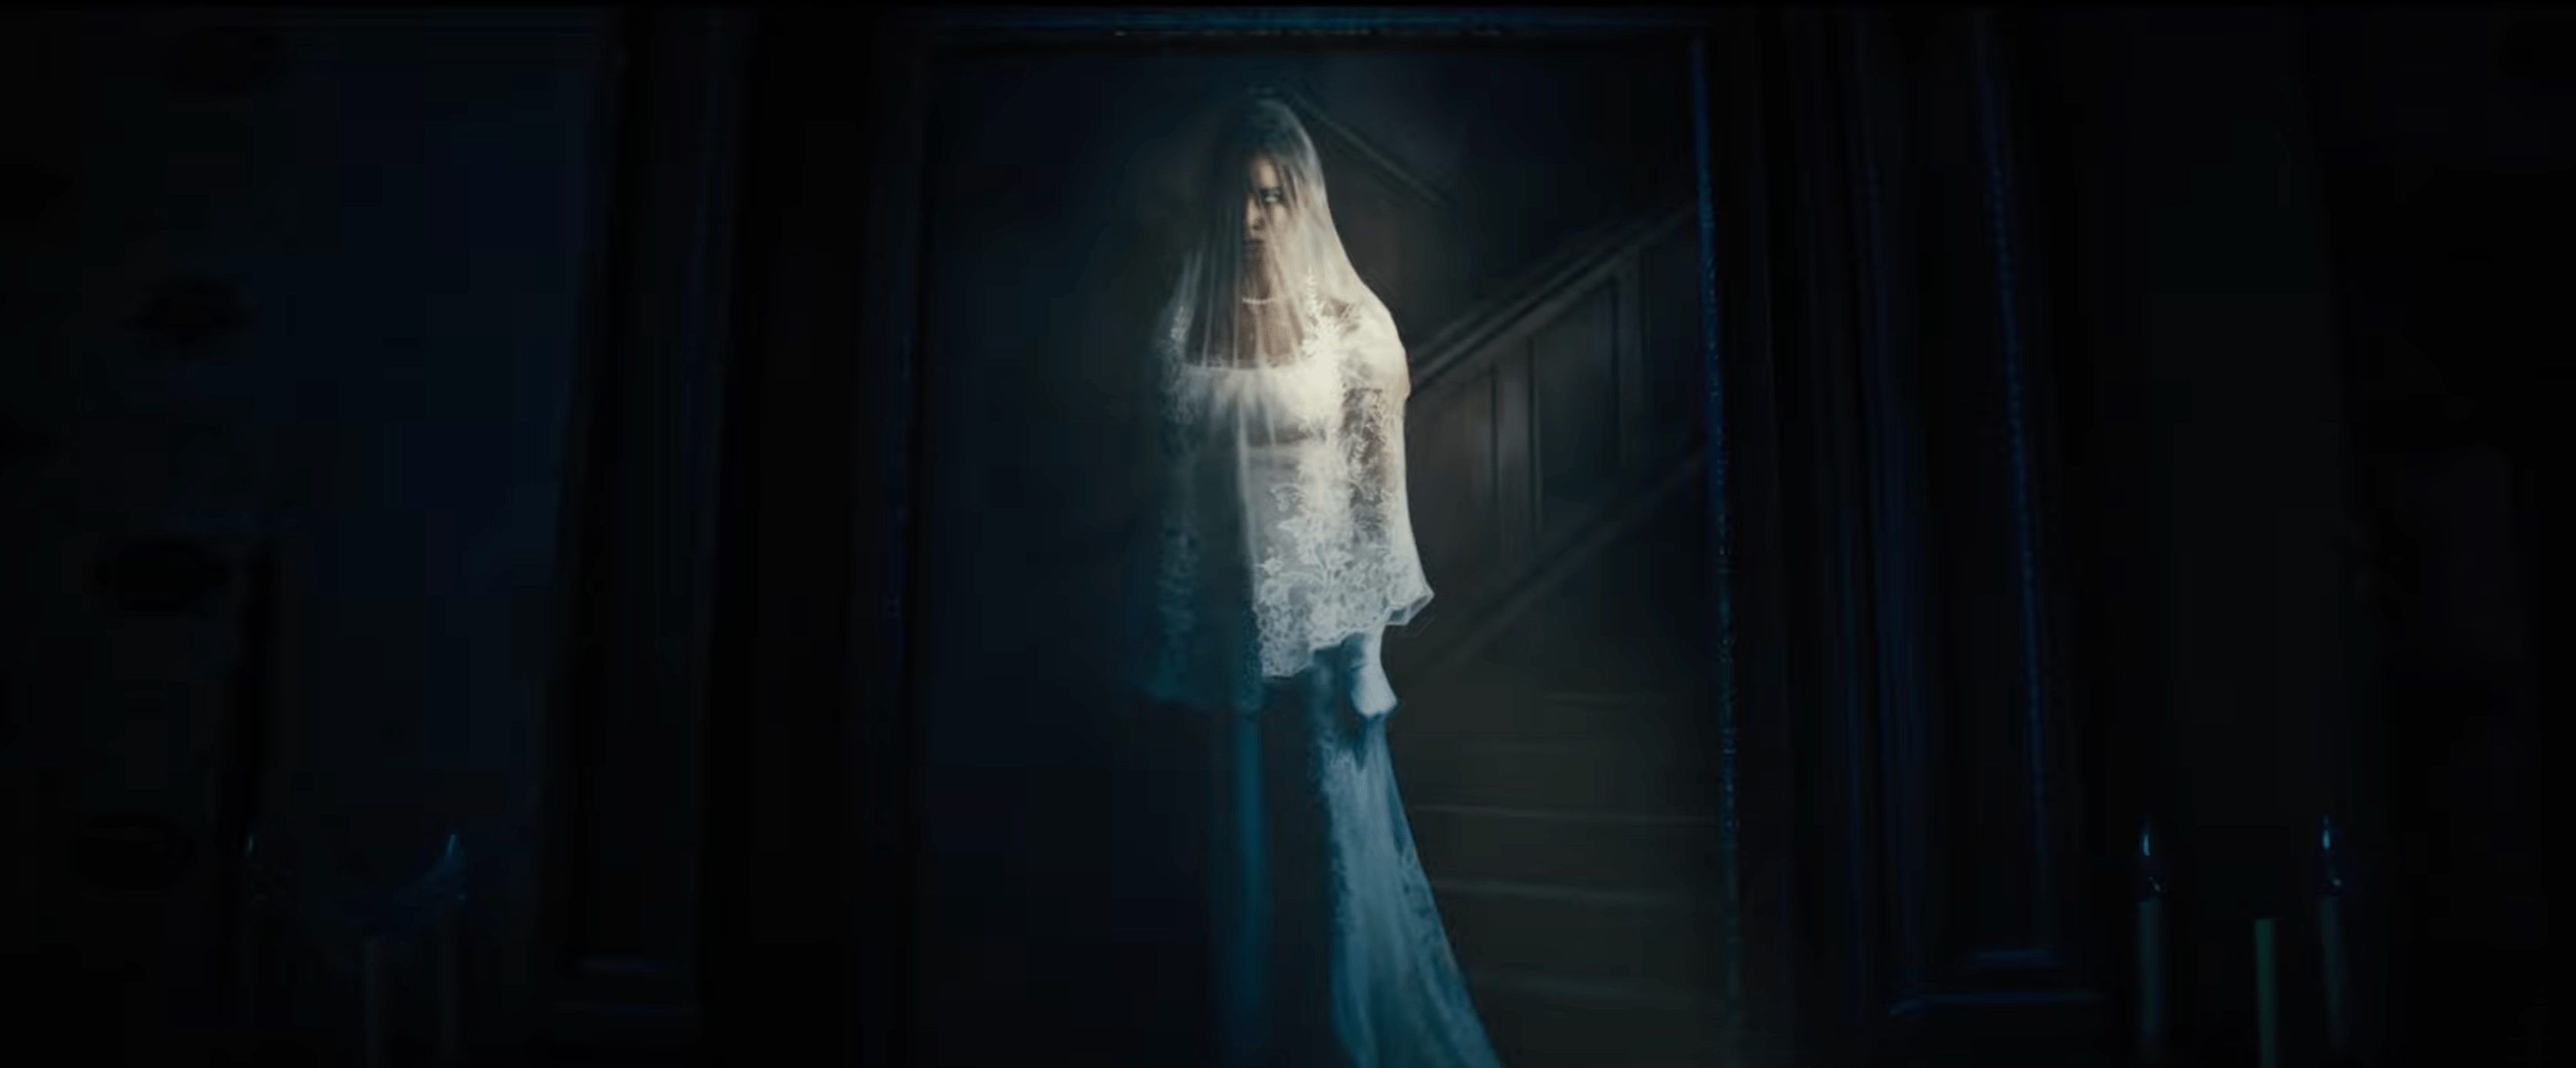 A portrait of constance Hatchaway in the haunted mansion trailer